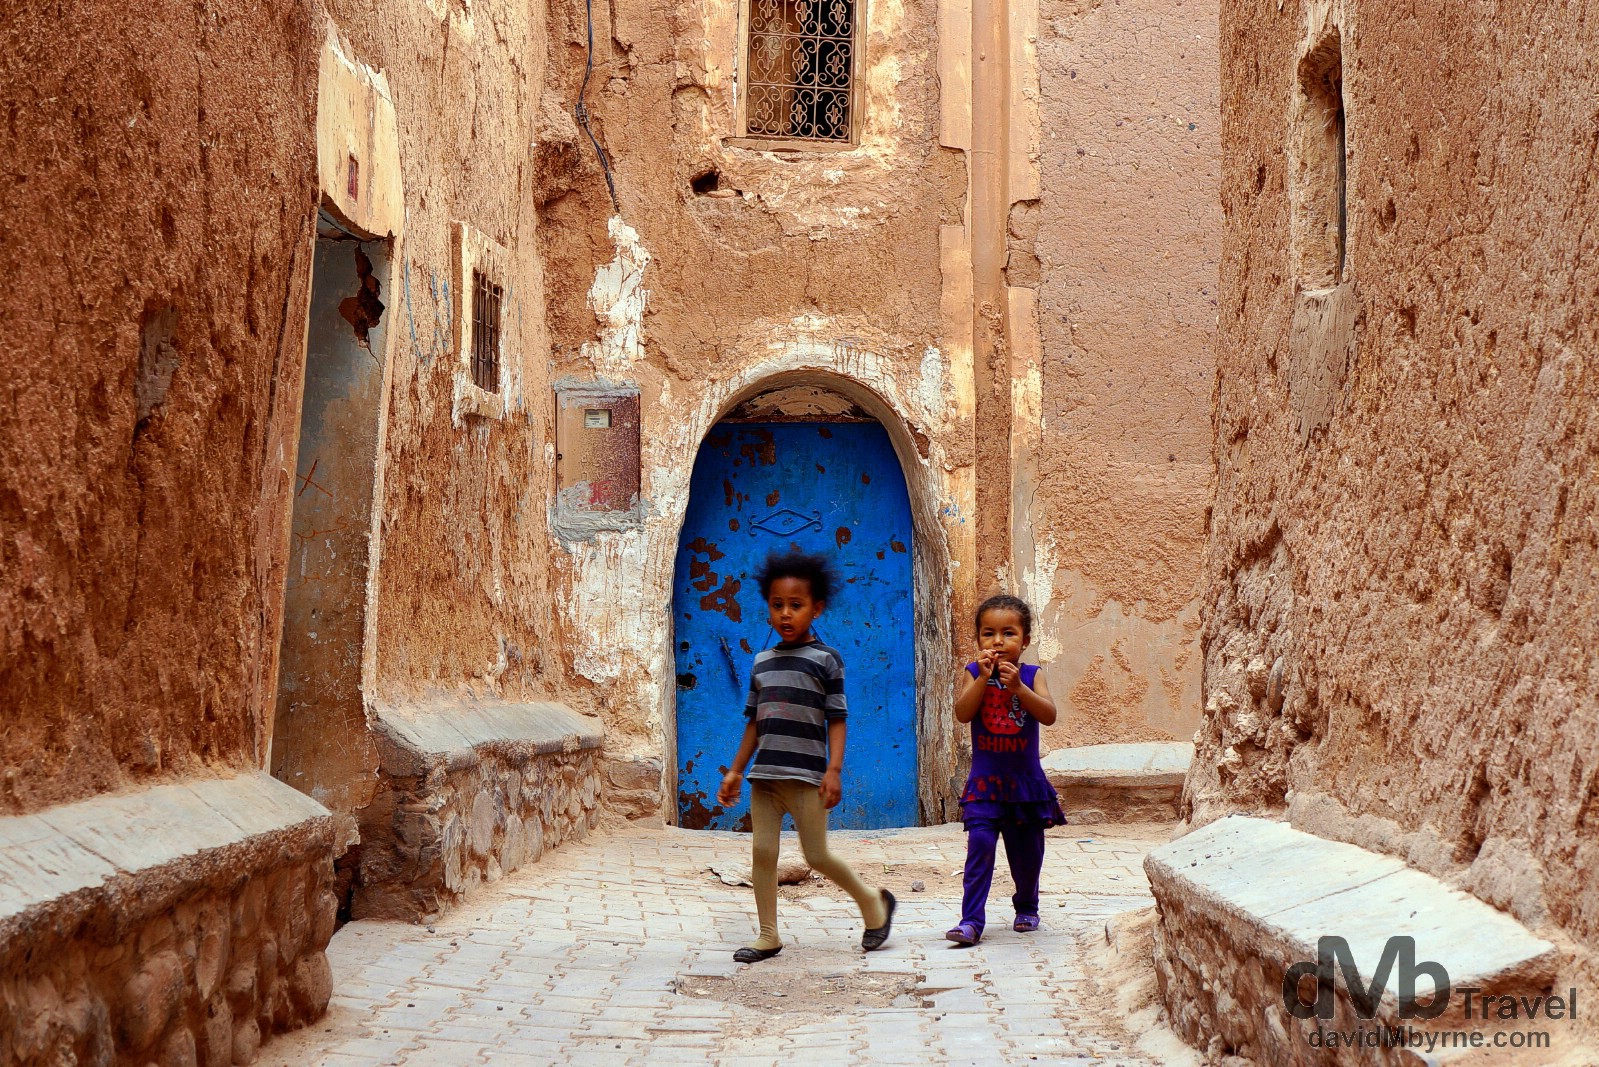 Kids in the lanes of the Kasbah Taourirt in Ouarzazate, Morocco. May 13th, 2014.